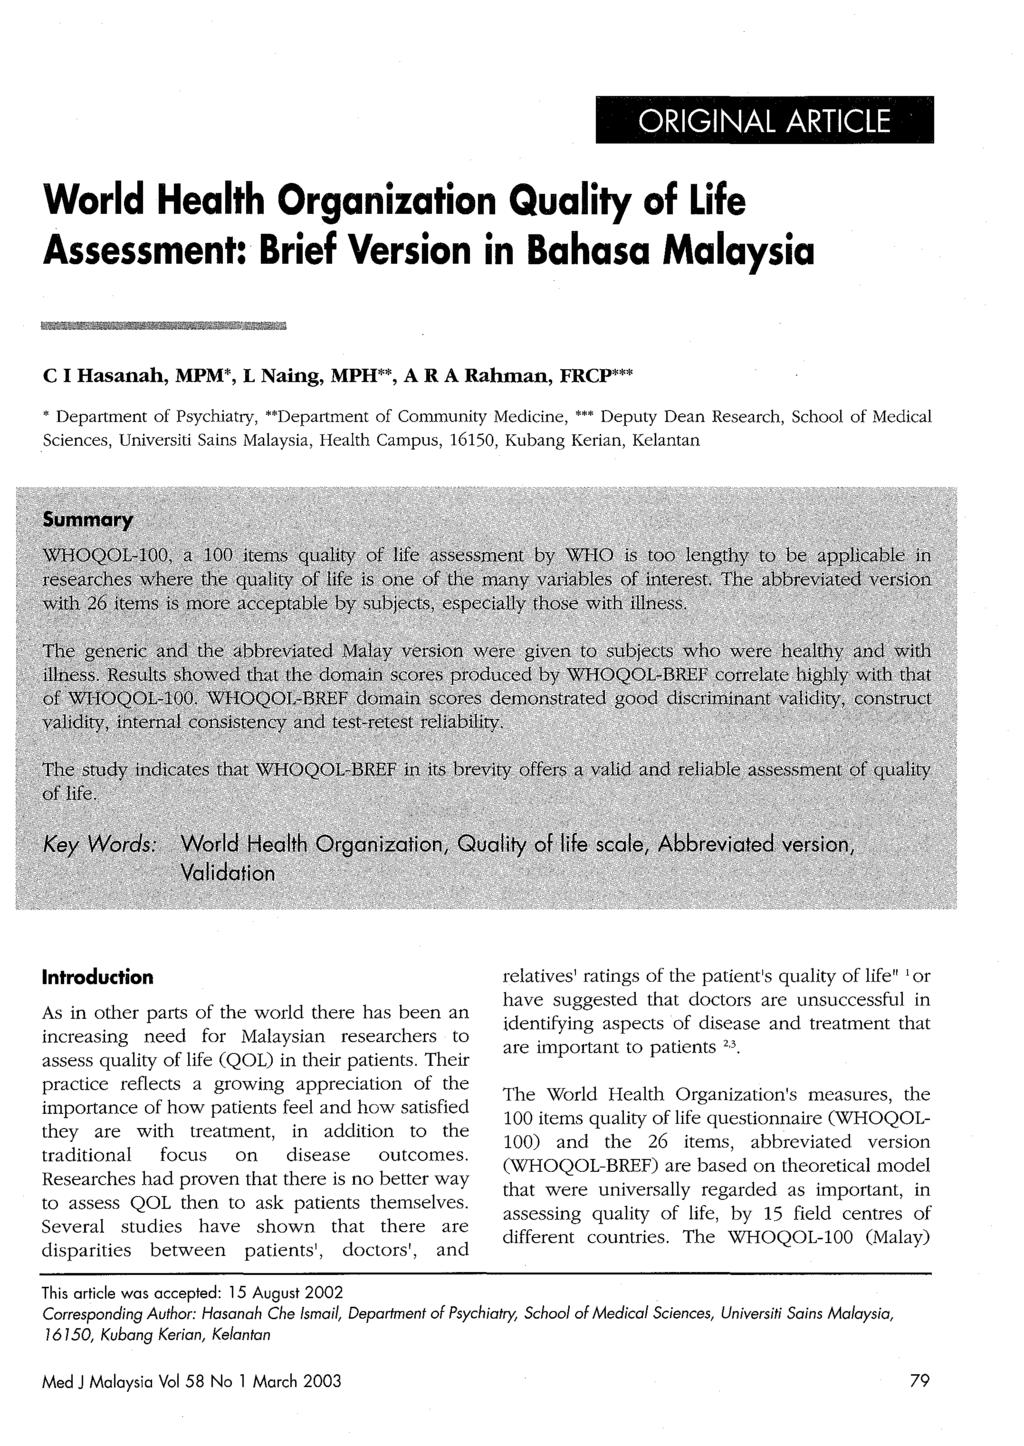 ORIGINAL ARTICLE World Health Organization Quality of Life Assessment: Brief Version in Bahasa Malaysia C I Hasanah, MPM*, L Naing, MPH**, A R A Rahman, FRCP***, Department of Psychiatry, "Department